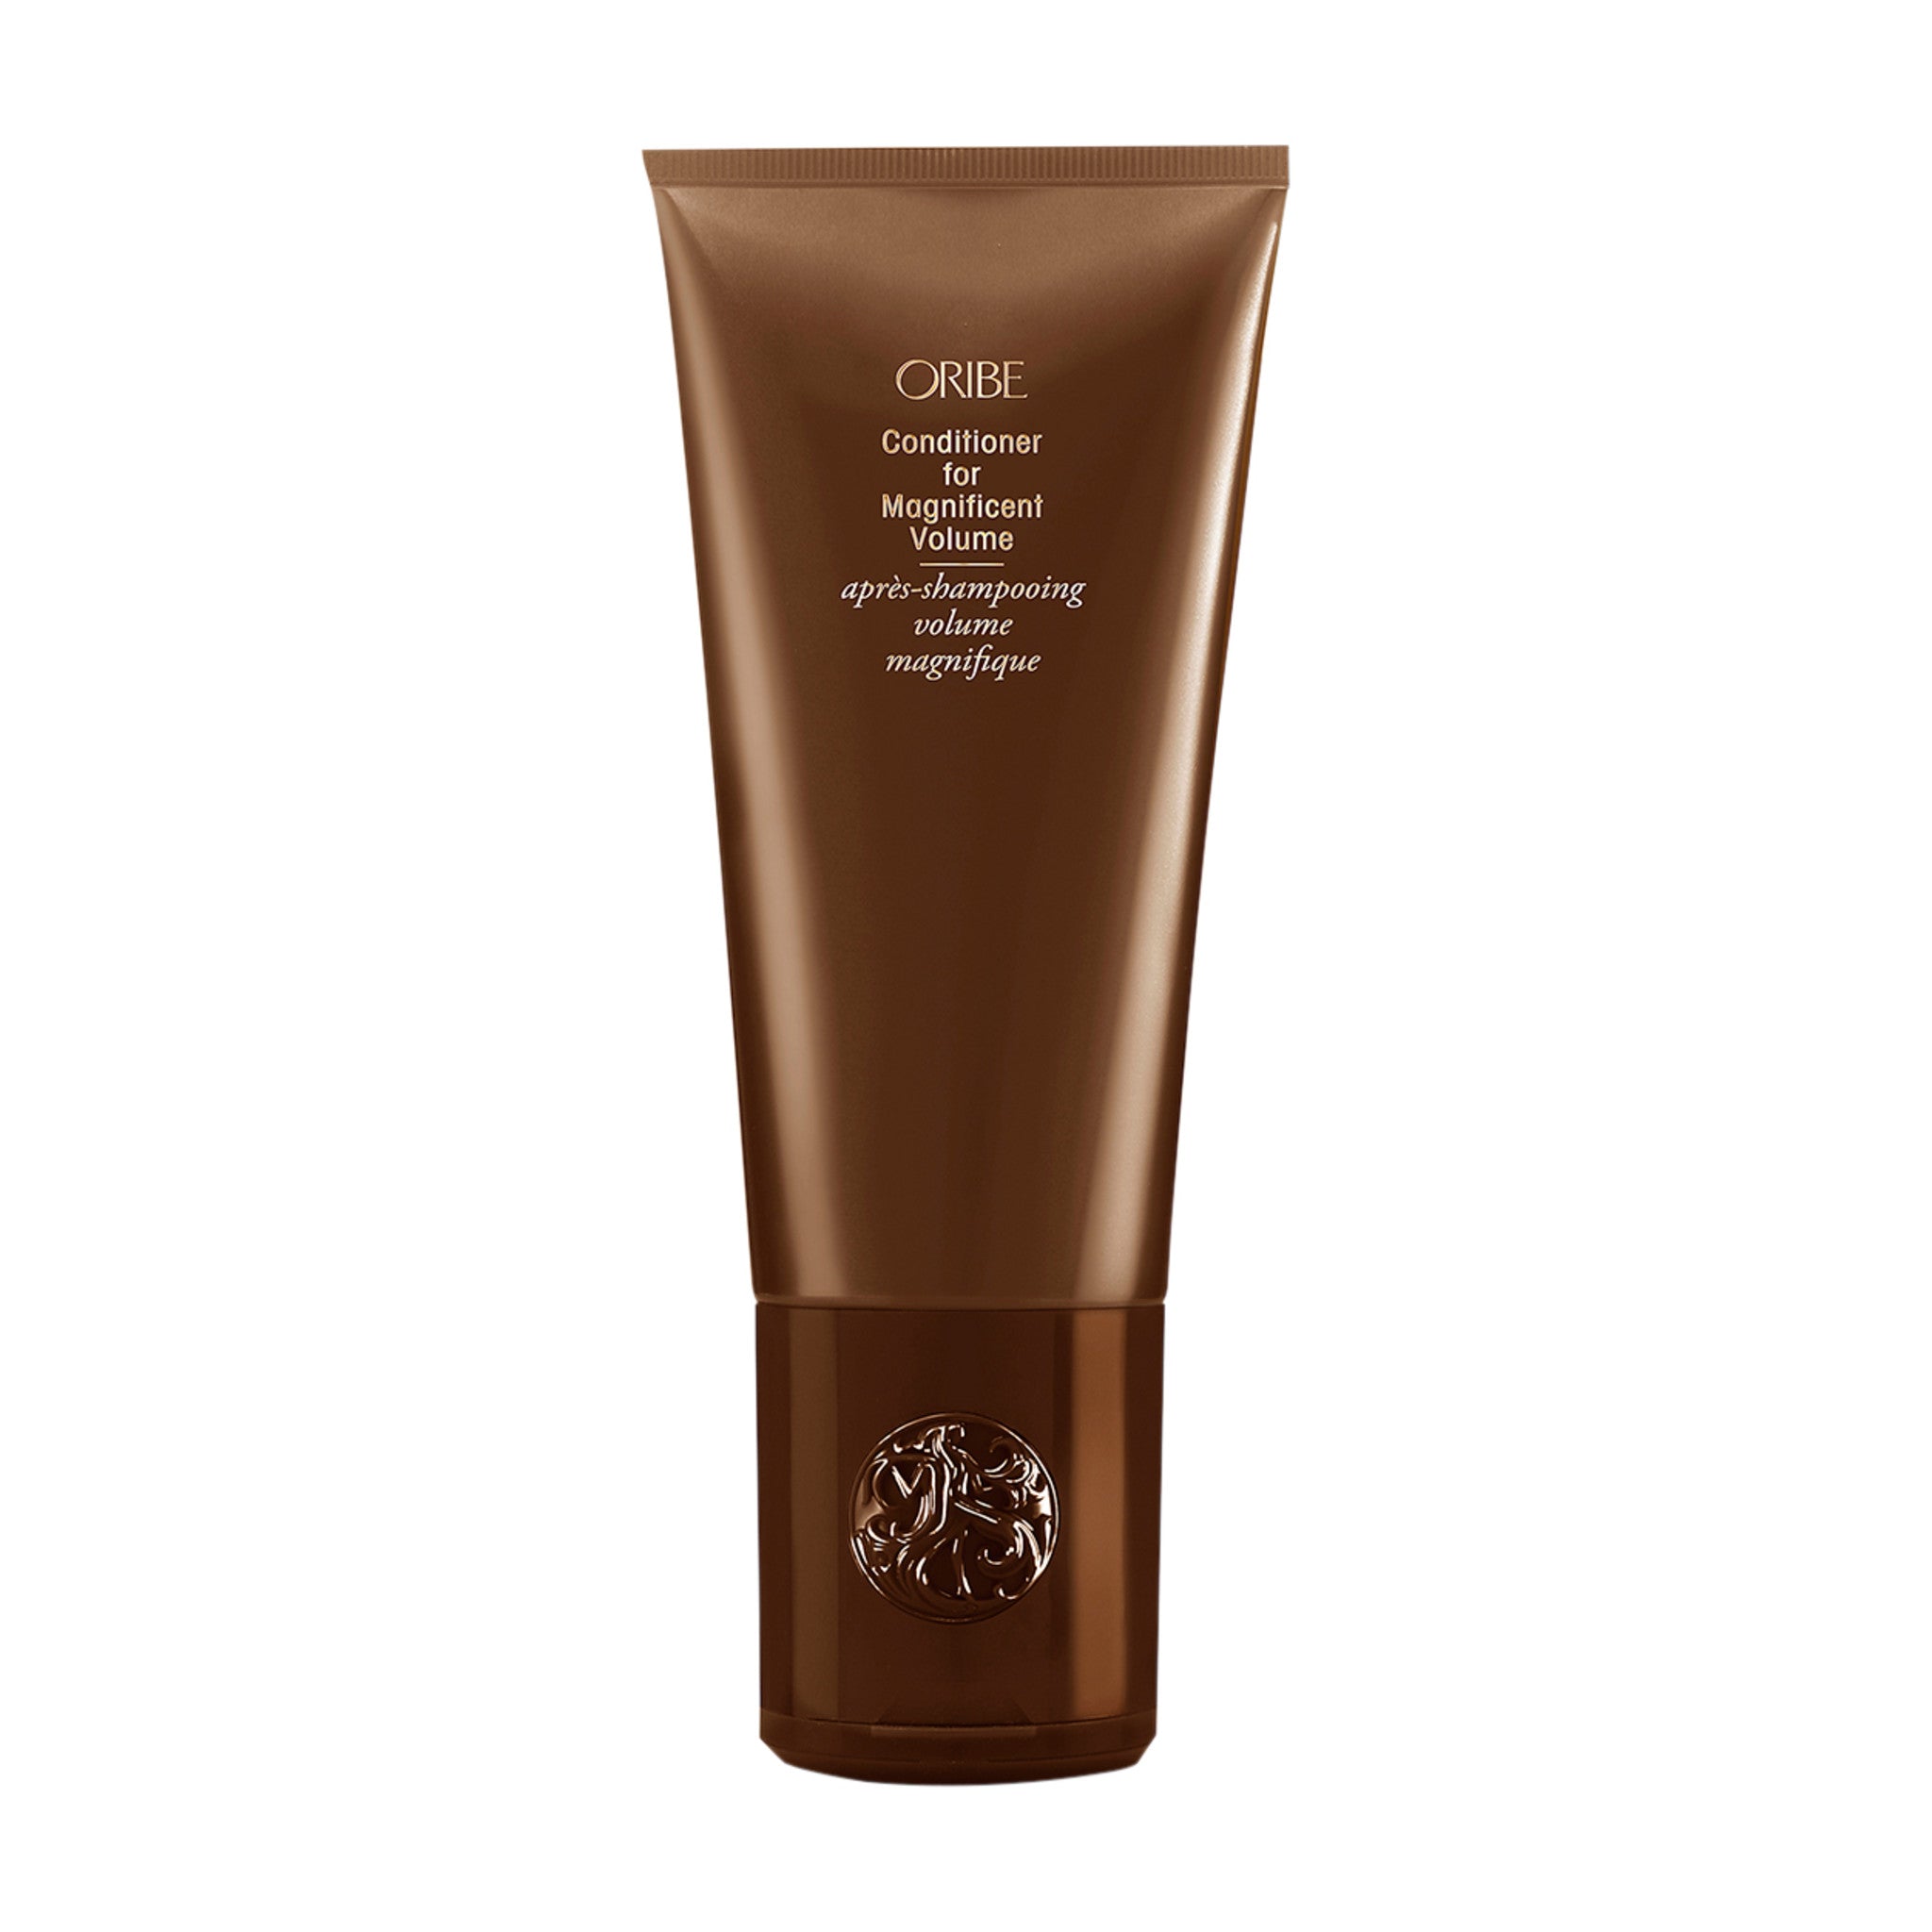 Oribe Conditioner For Magnificent Volume main image.